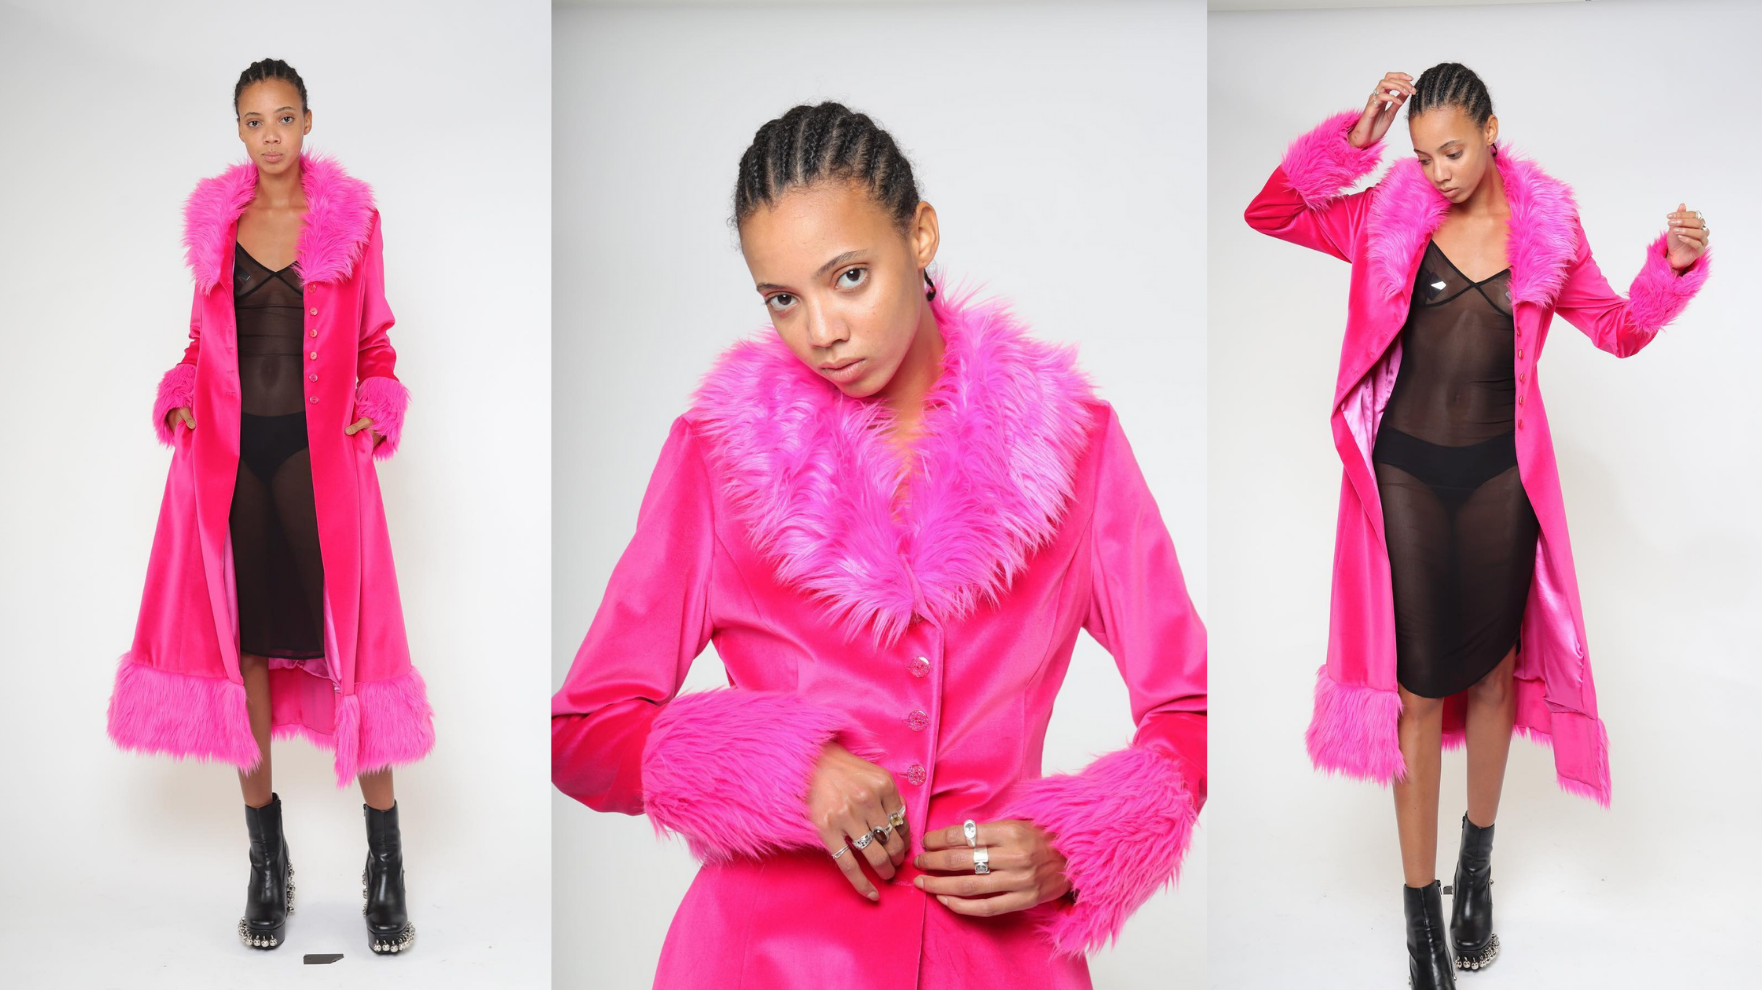 THAT PINK COAT FROM BECKY HILL'S "LAST TIME" VIDEO